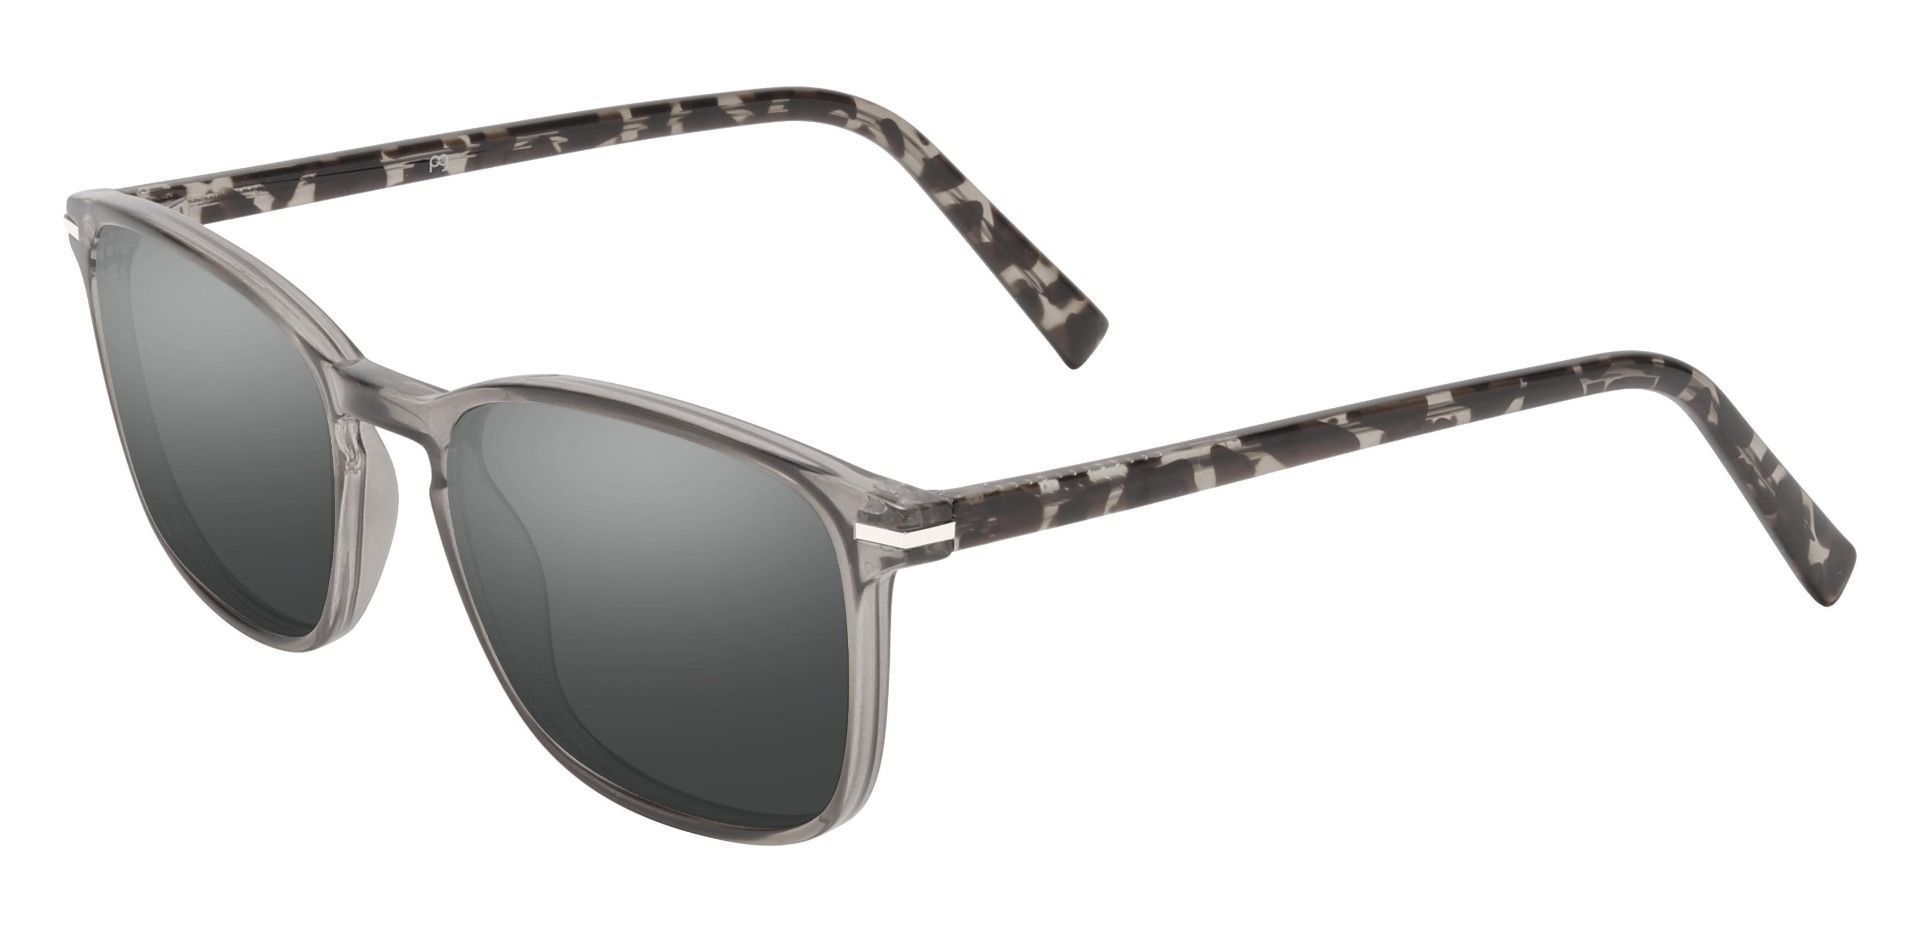 Dumont Rectangle Non-Rx Sunglasses - Gray Frame With Gray Lenses